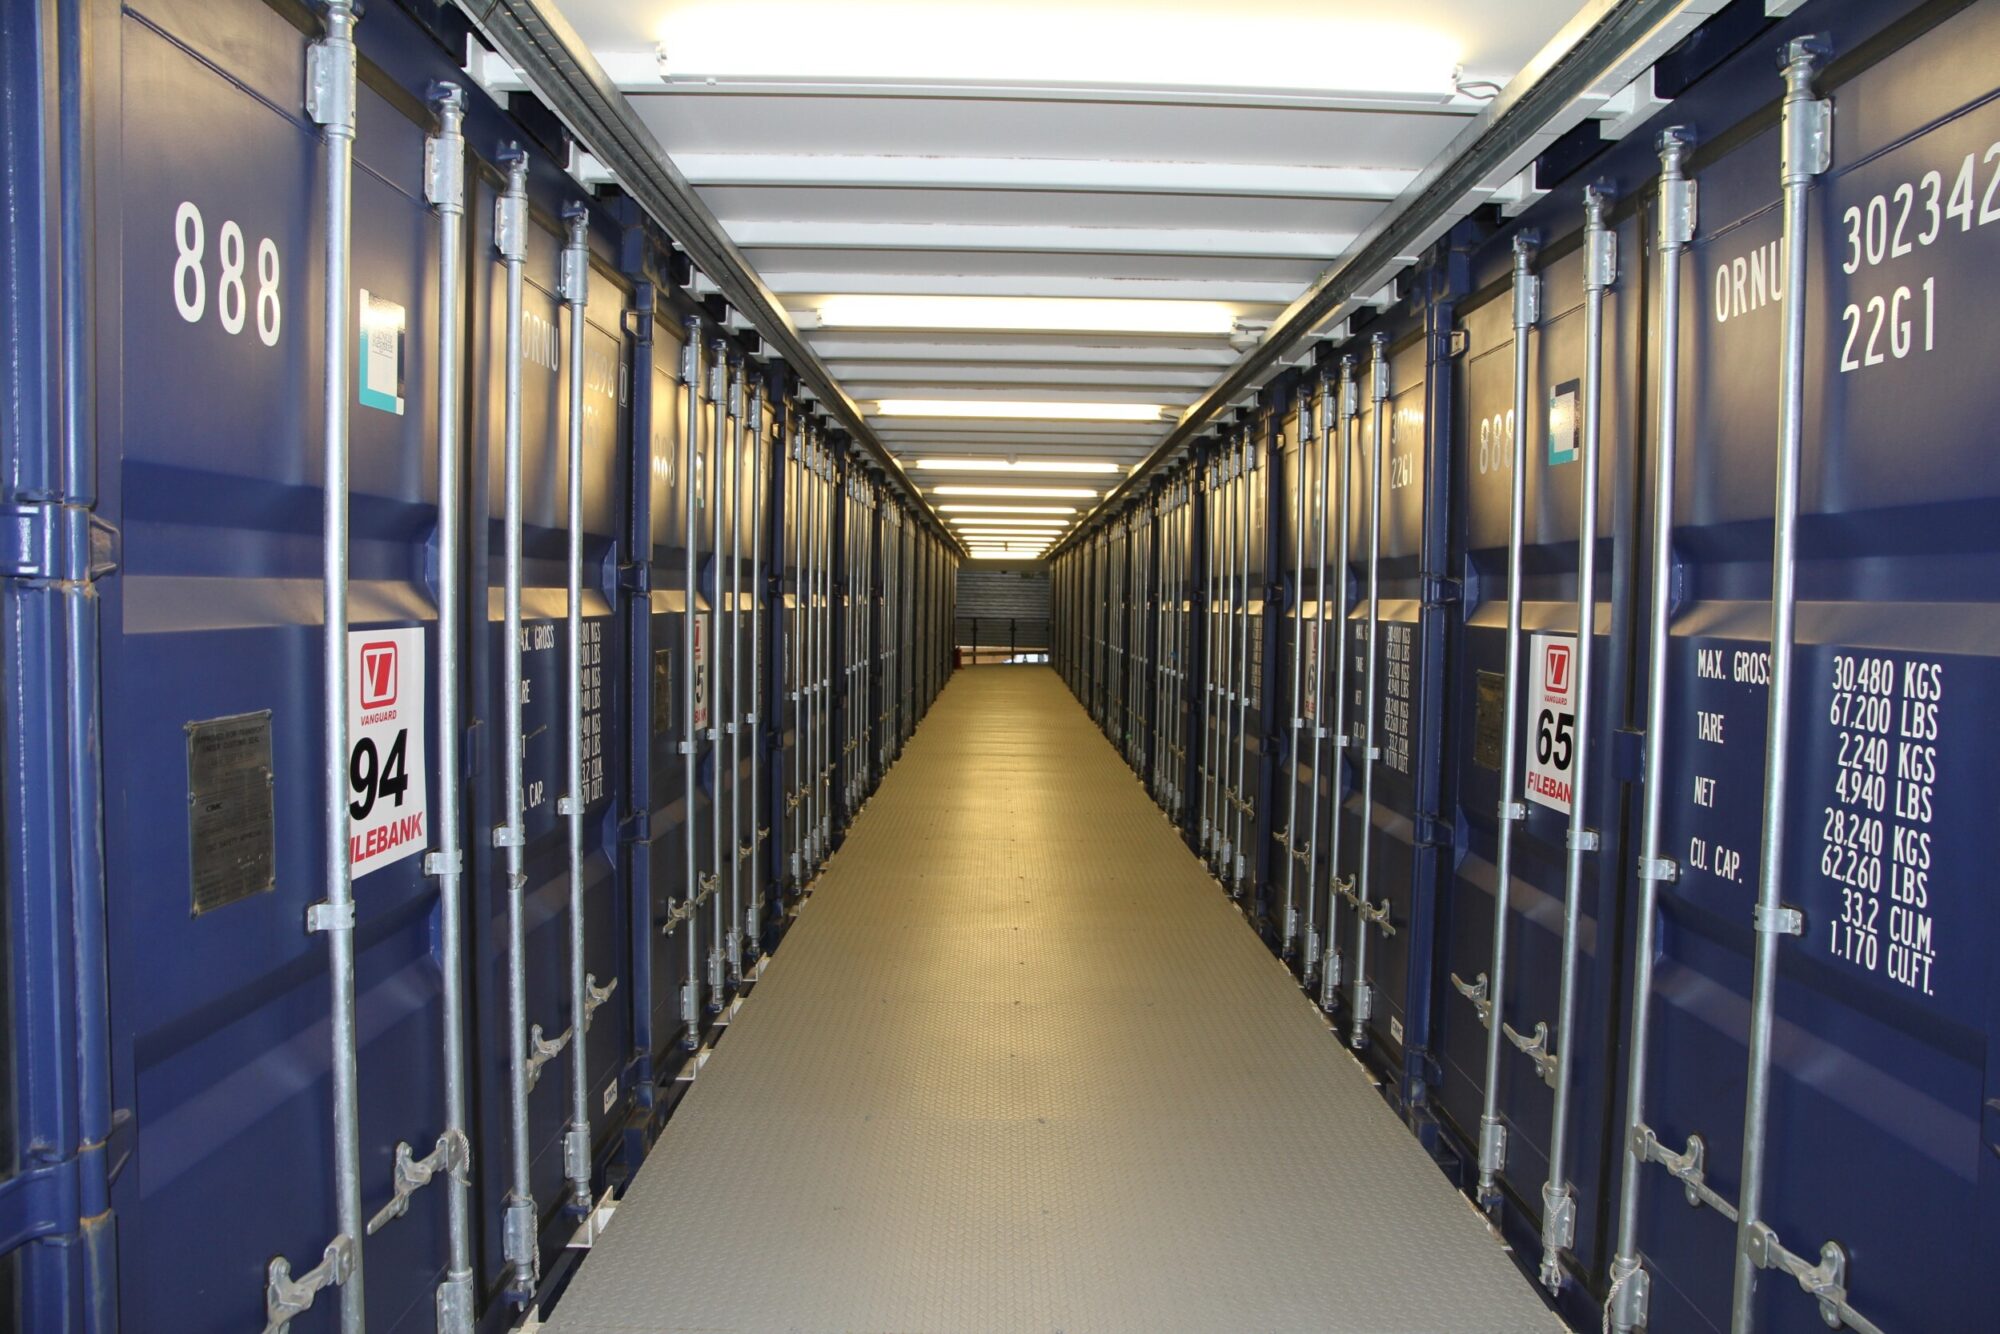 A photo showing the hallway at Vanguard's container storage branch in East London.